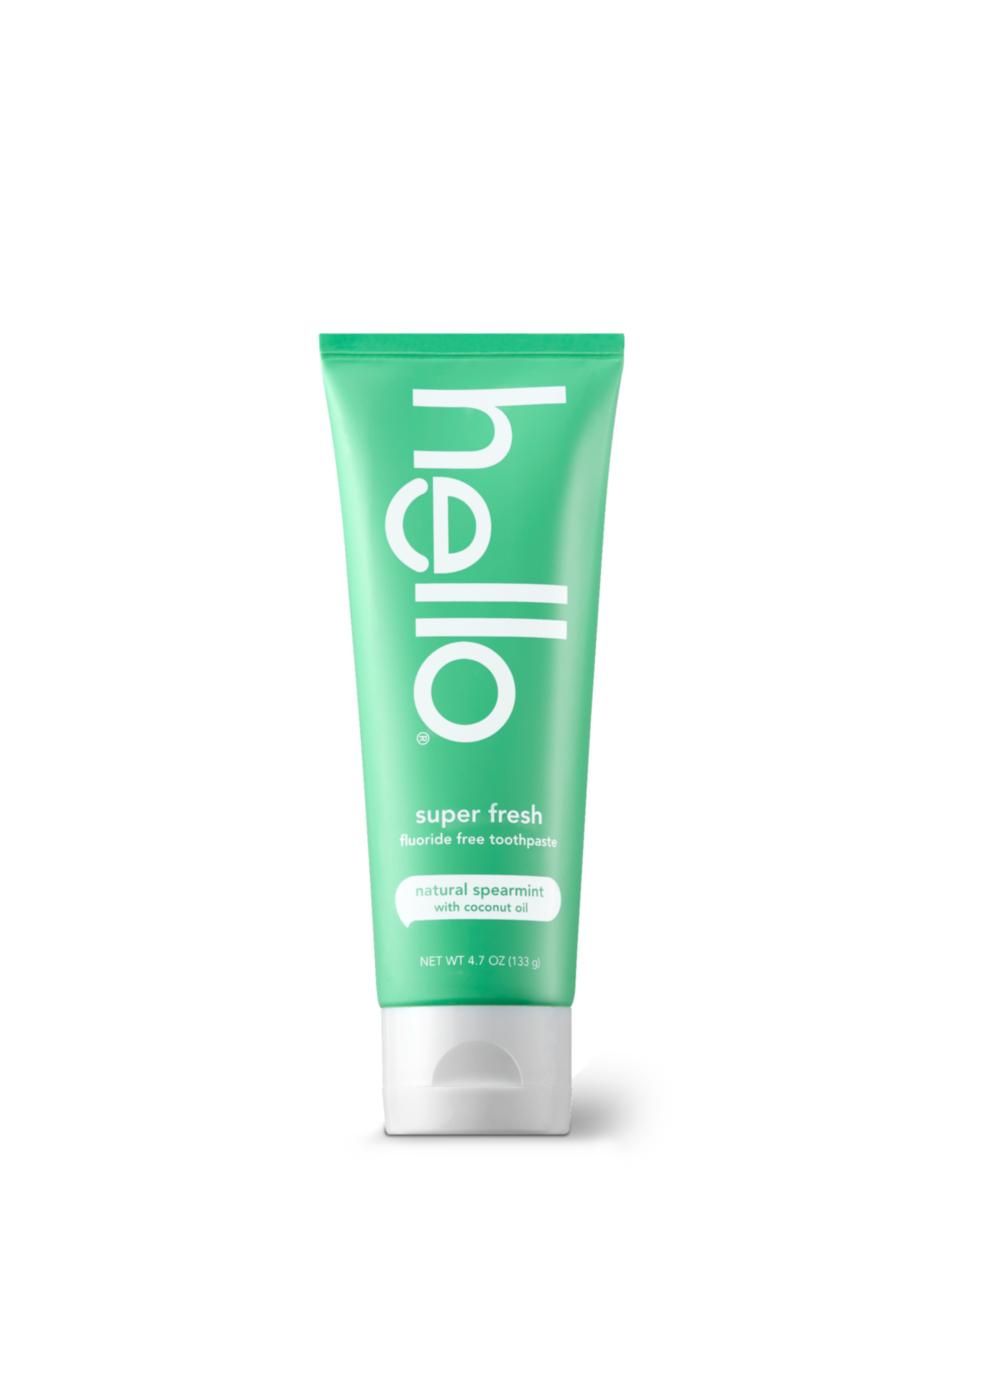 Hello Super Fresh Fluoride Free Toothpaste - Natural Spearmint; image 2 of 4